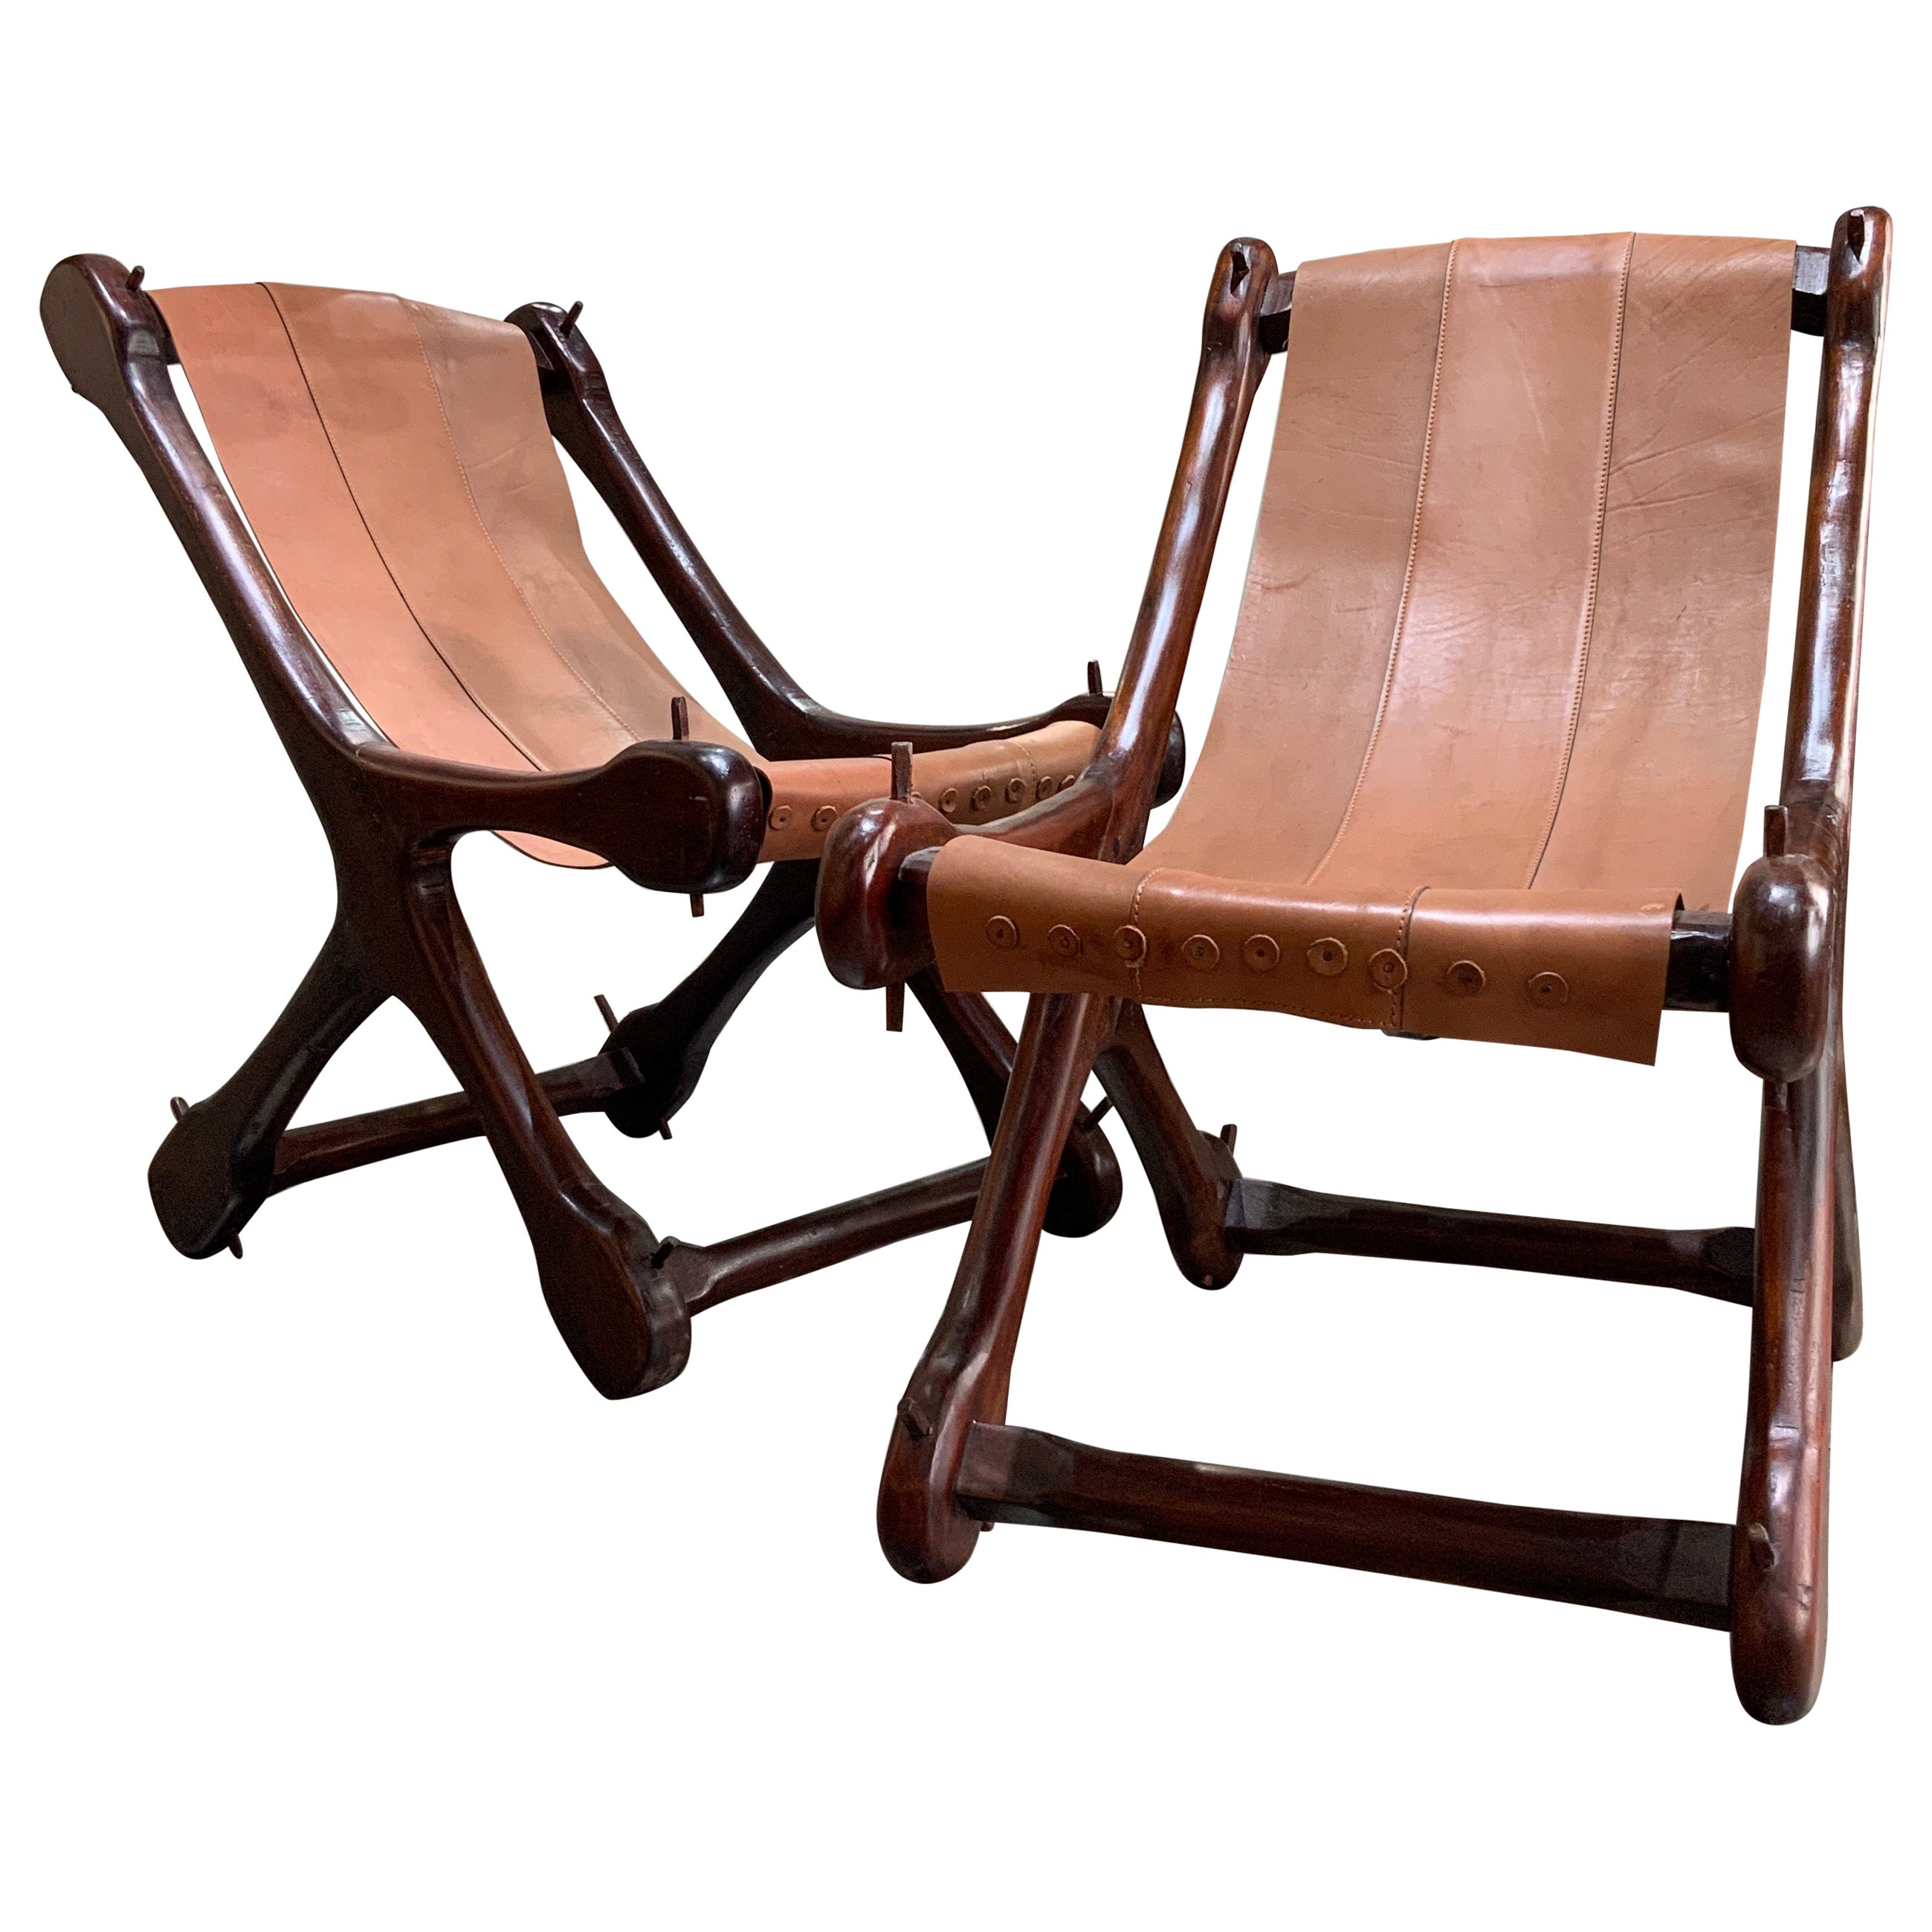 Pair of Lounge Chairs Don S Shoemaker, circa 1970 